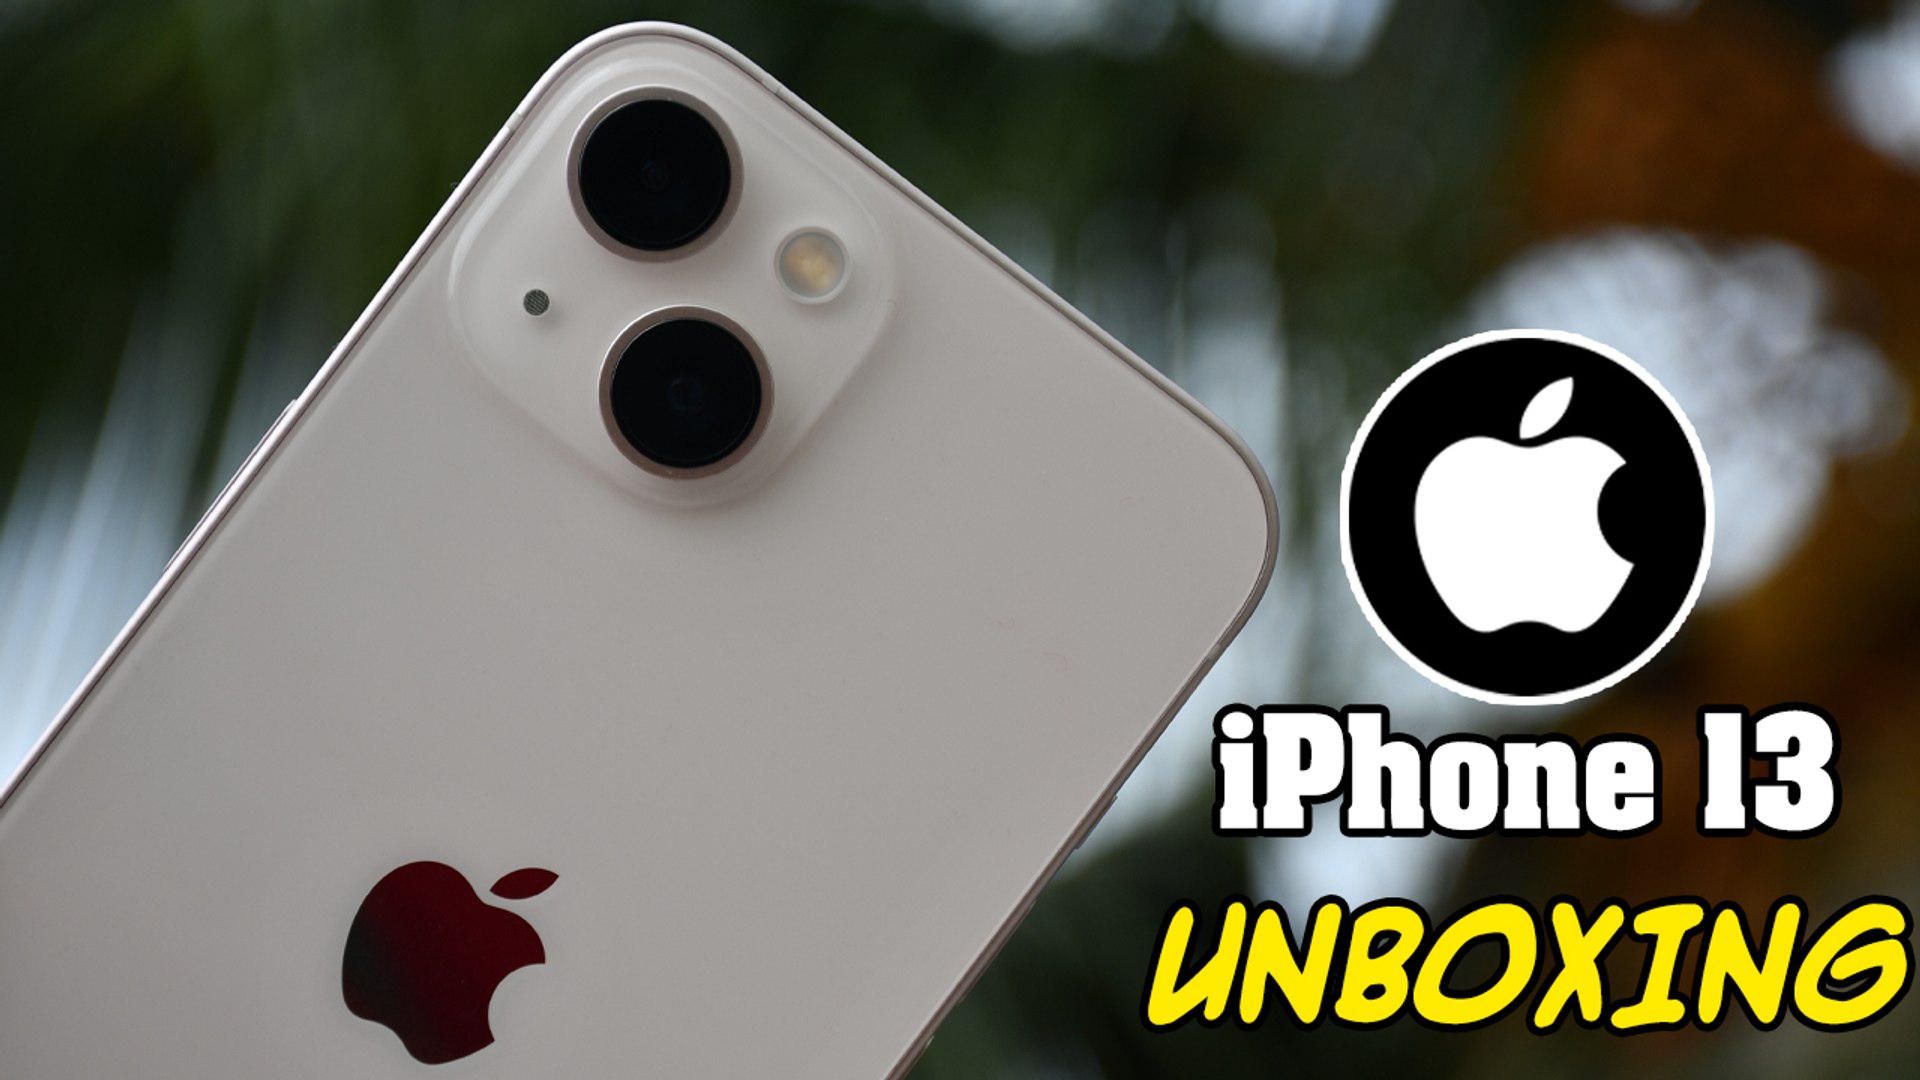 Apple iPhone 13 Unboxing - video Dailymotion